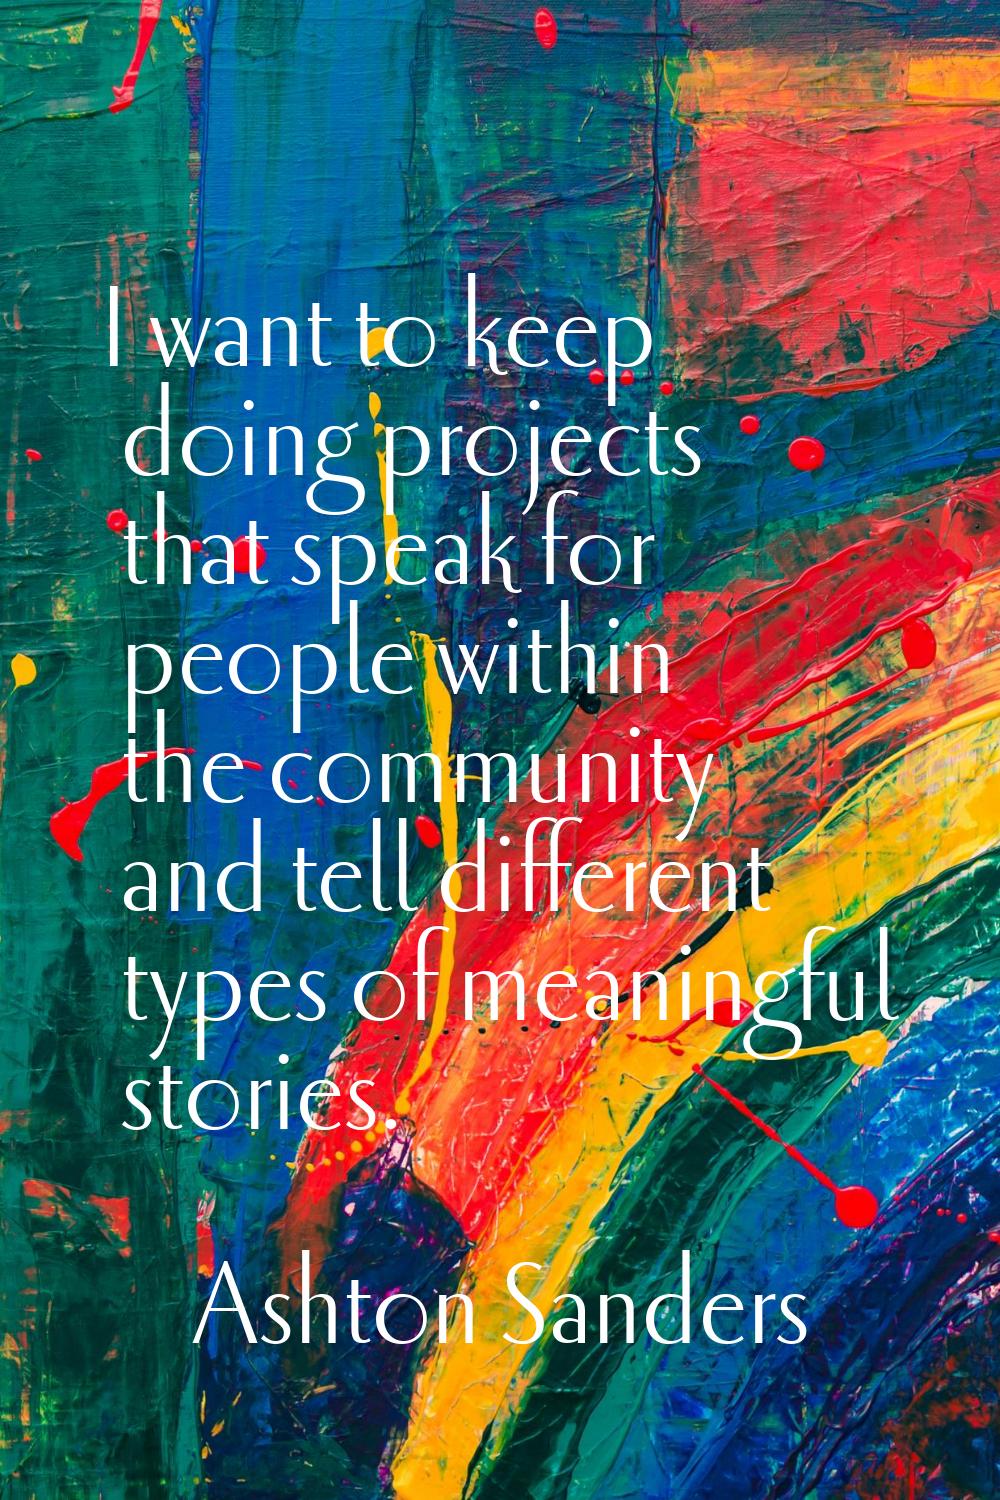 I want to keep doing projects that speak for people within the community and tell different types o